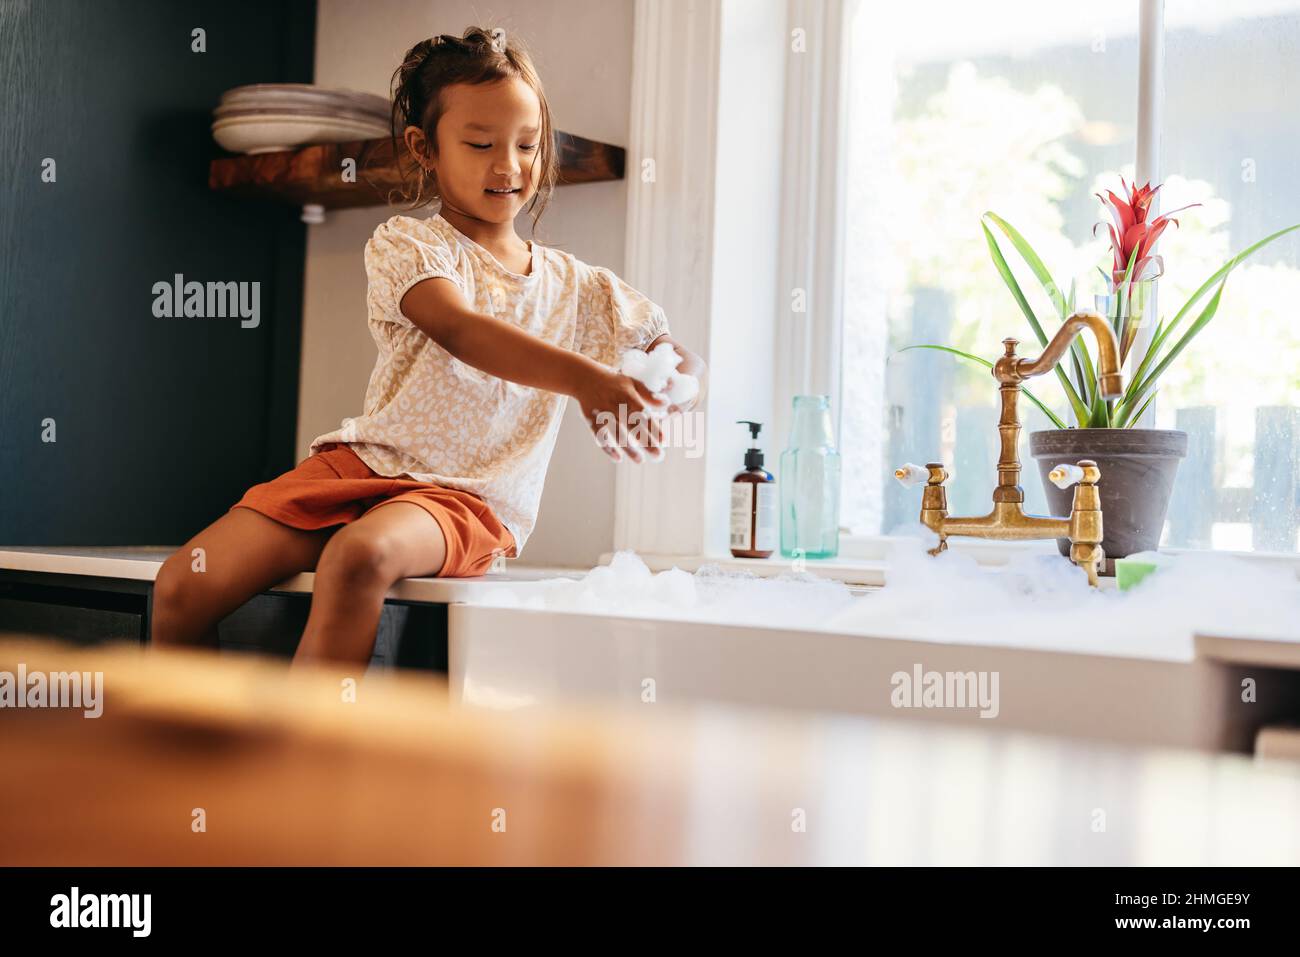 Young girl playing with soap bubbles in the kitchen. Cute little girl having fun with white foam while sitting next to the kitchen sink at home. Stock Photo